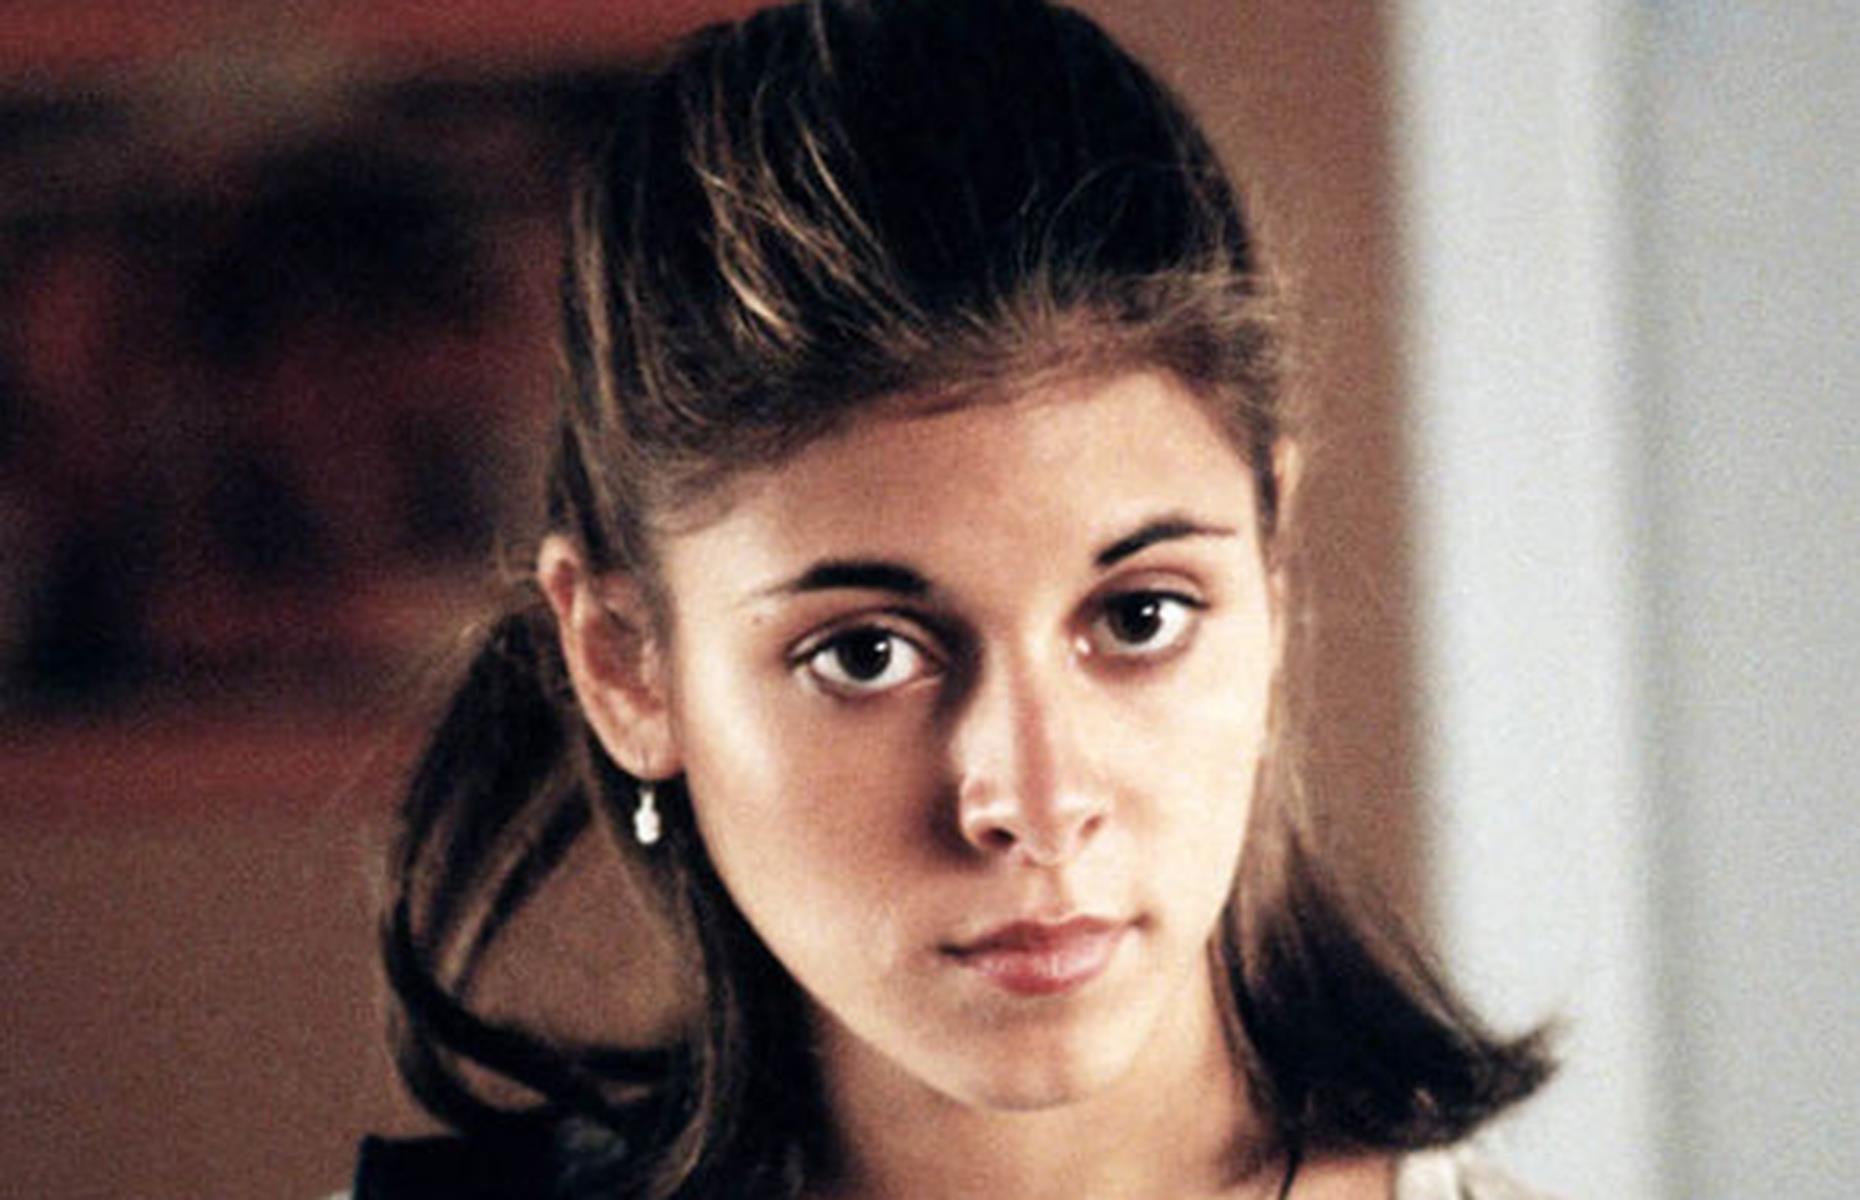 <p>Jamie-Lynn Sigler shot to fame playing Meadow Soprano, the daughter of Tony. She appeared in all six seasons of the show.</p>  <p>Though Sigler was just a teen when she landed her breakout role in <em>The Sopranos</em>, she’d already flexed her acting chops in the 1998 crime flick <em>A Brooklyn State of Mind.</em></p>